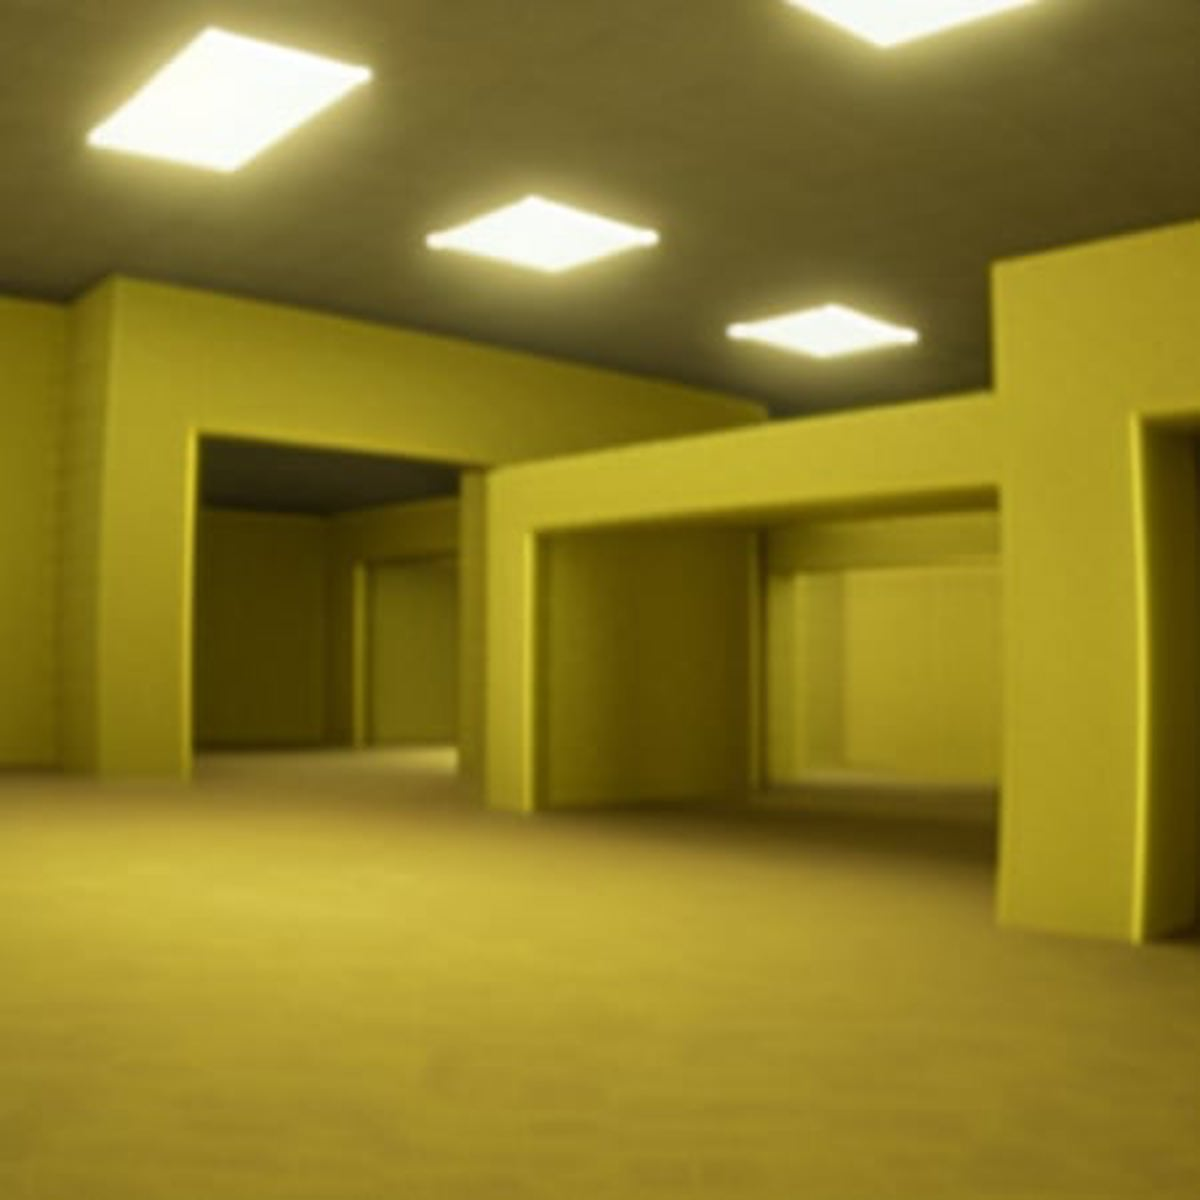 The Poolrooms, Roblox Liminal Spaces Wiki